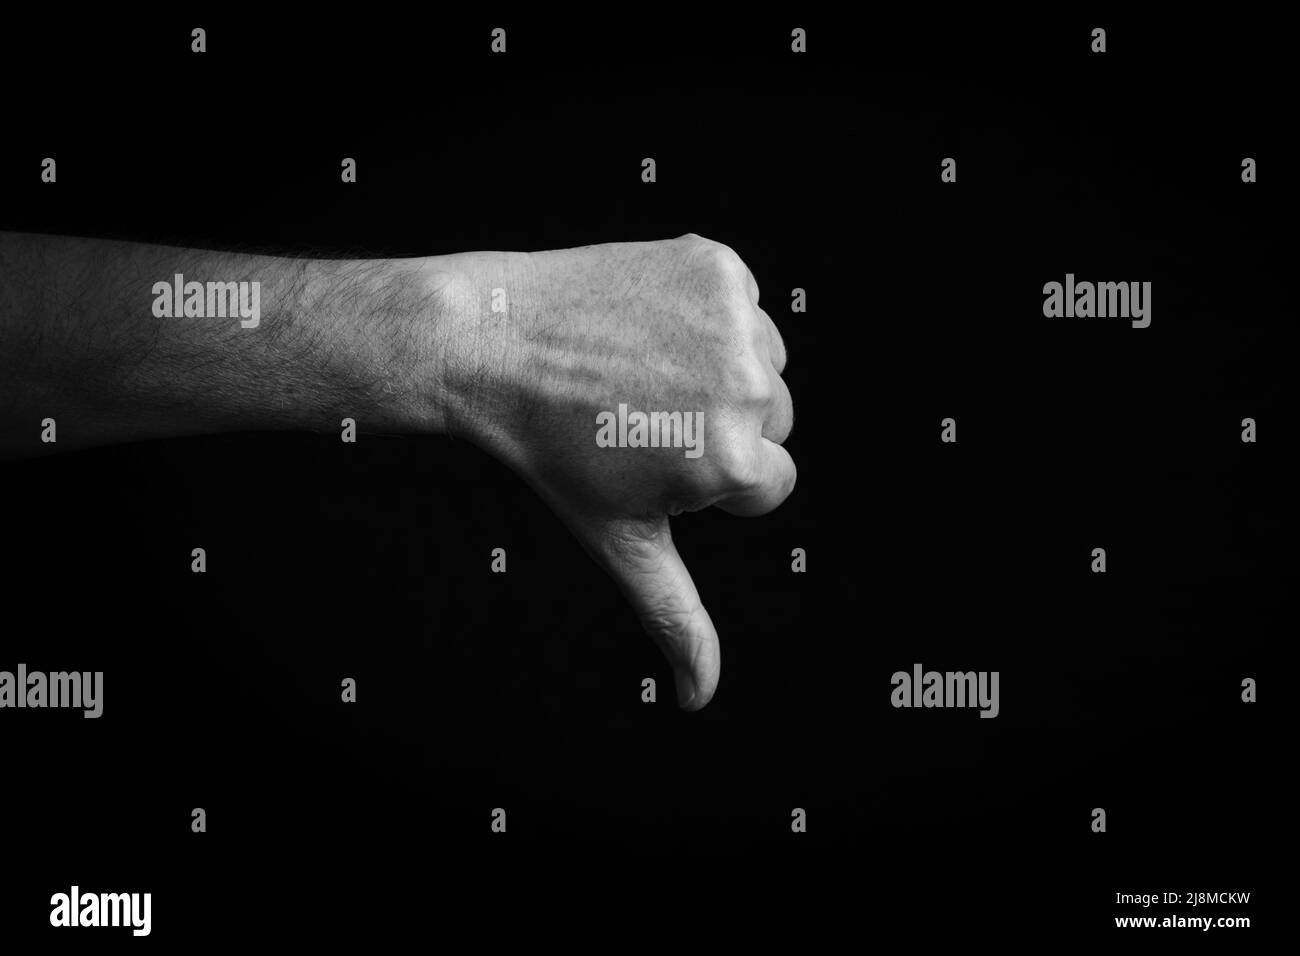 Dramatic black and white image of Thumbs Down emoji isolated on black background Stock Photo